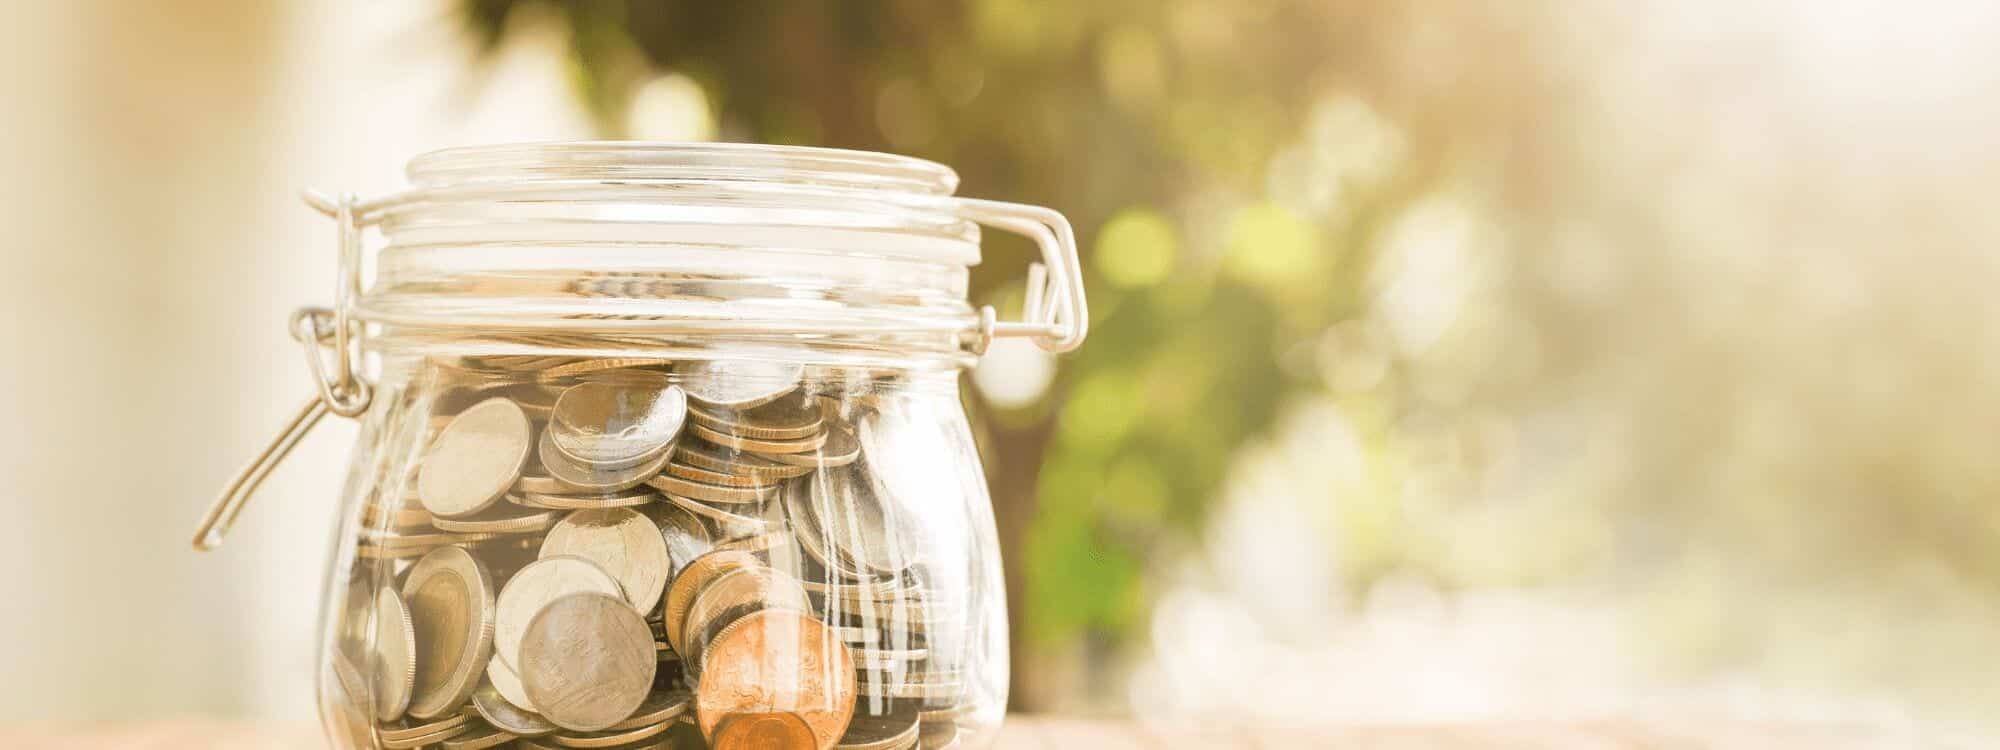 A saving jar full of coins shows the benefits of booking & paying for Southpac courses and Diplomas before tax time.